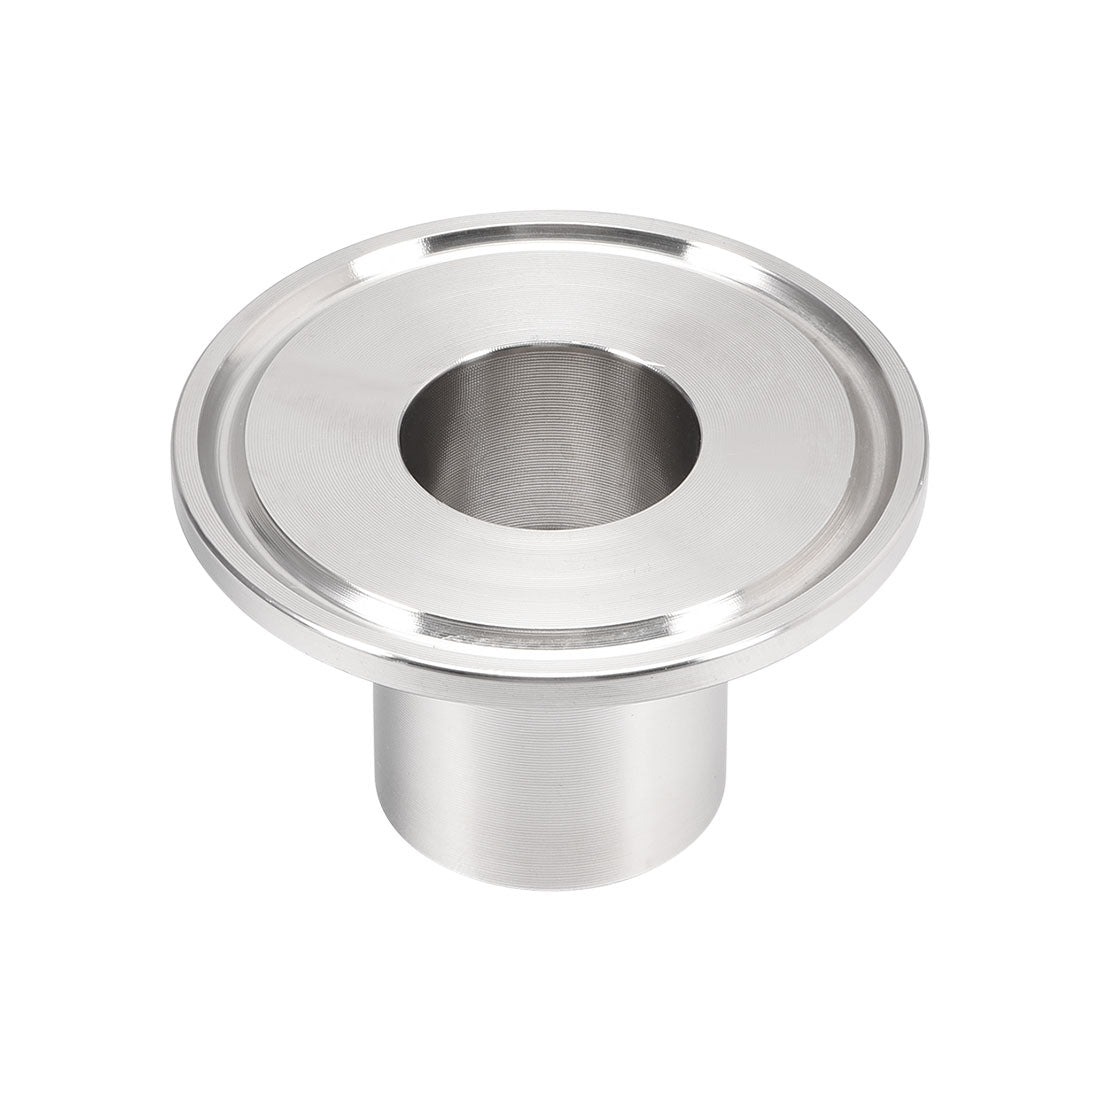 uxcell Uxcell 1/2 G Female Threaded Pipe Fitting to Clamp OD 50.5mm Ferrule